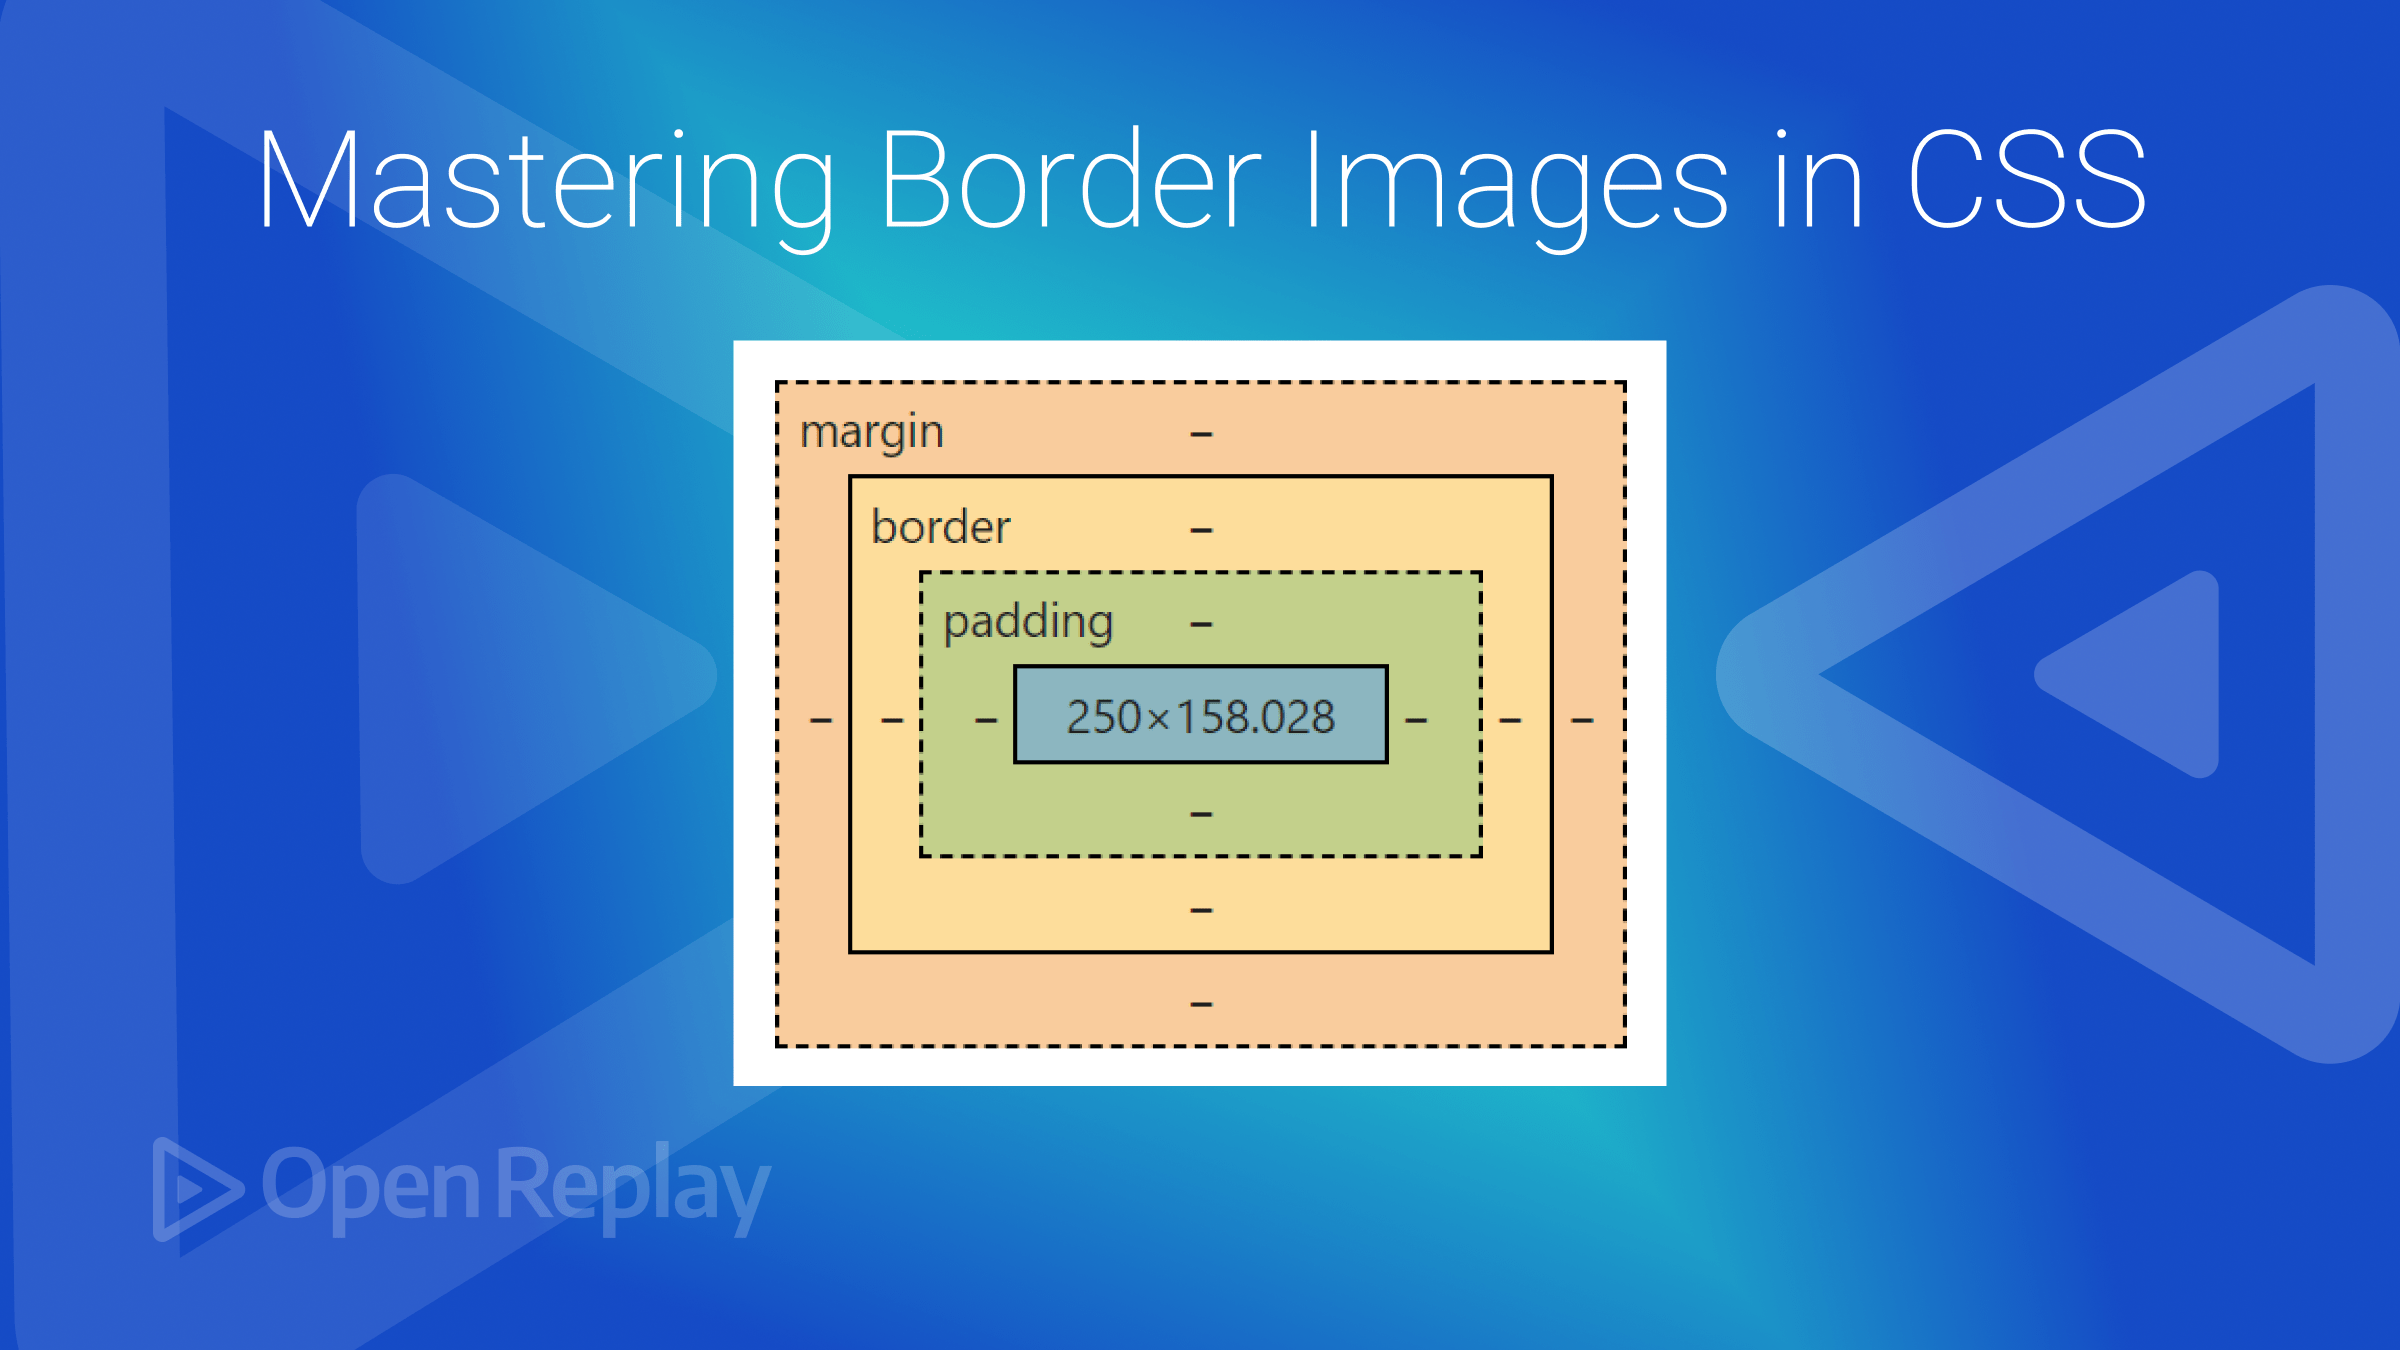 Mastering Border Images in CSS